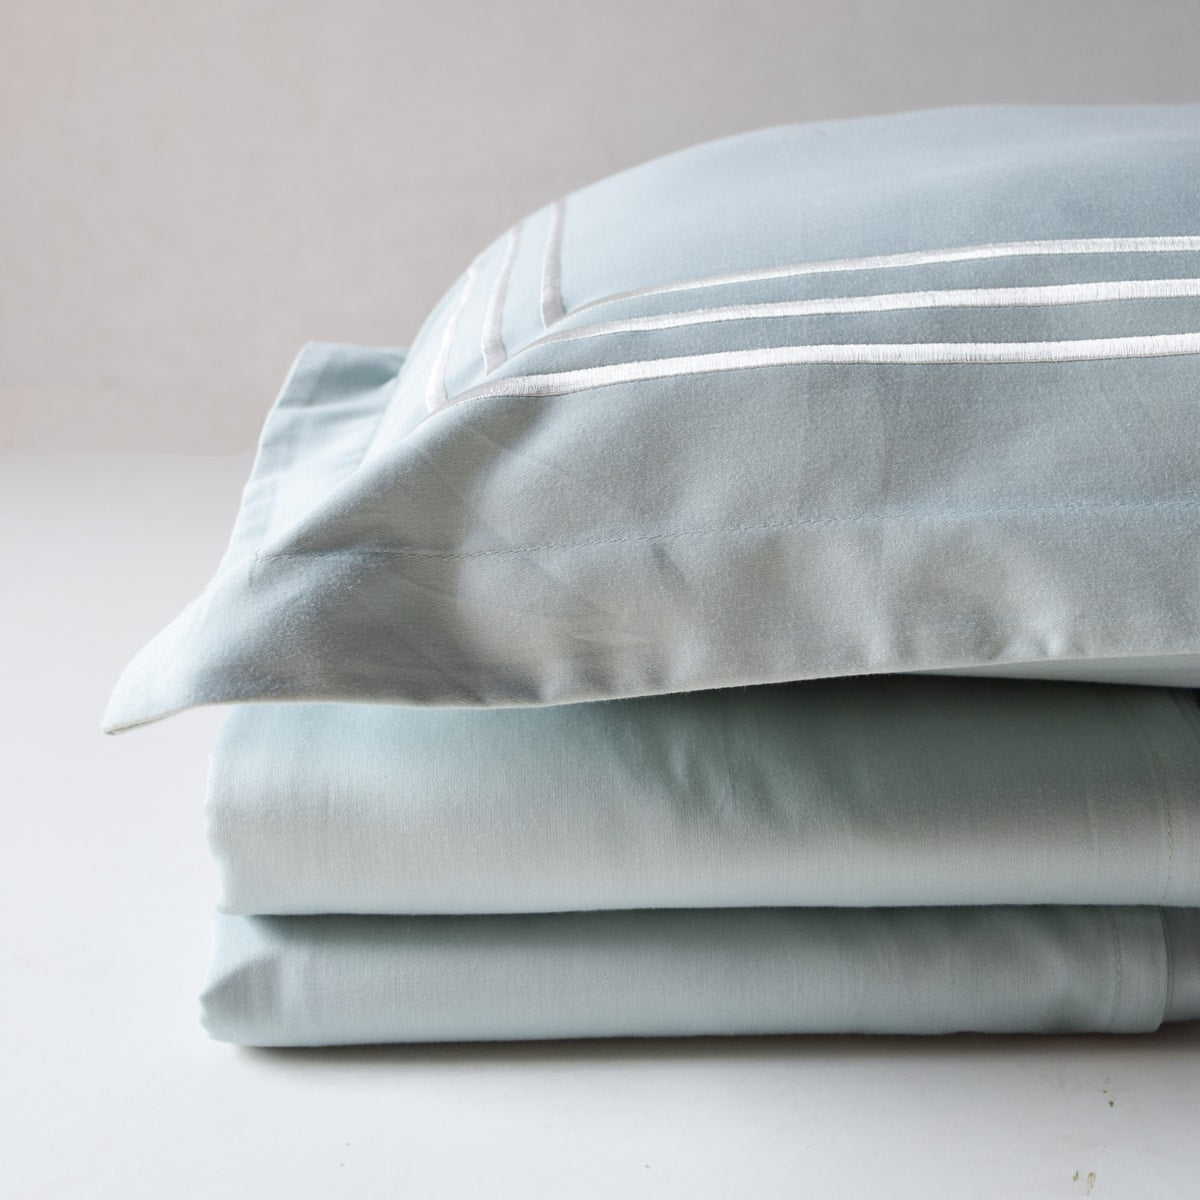 Parallel Frosty Green Cotton Sateen Bed Sheet by Veda Homes